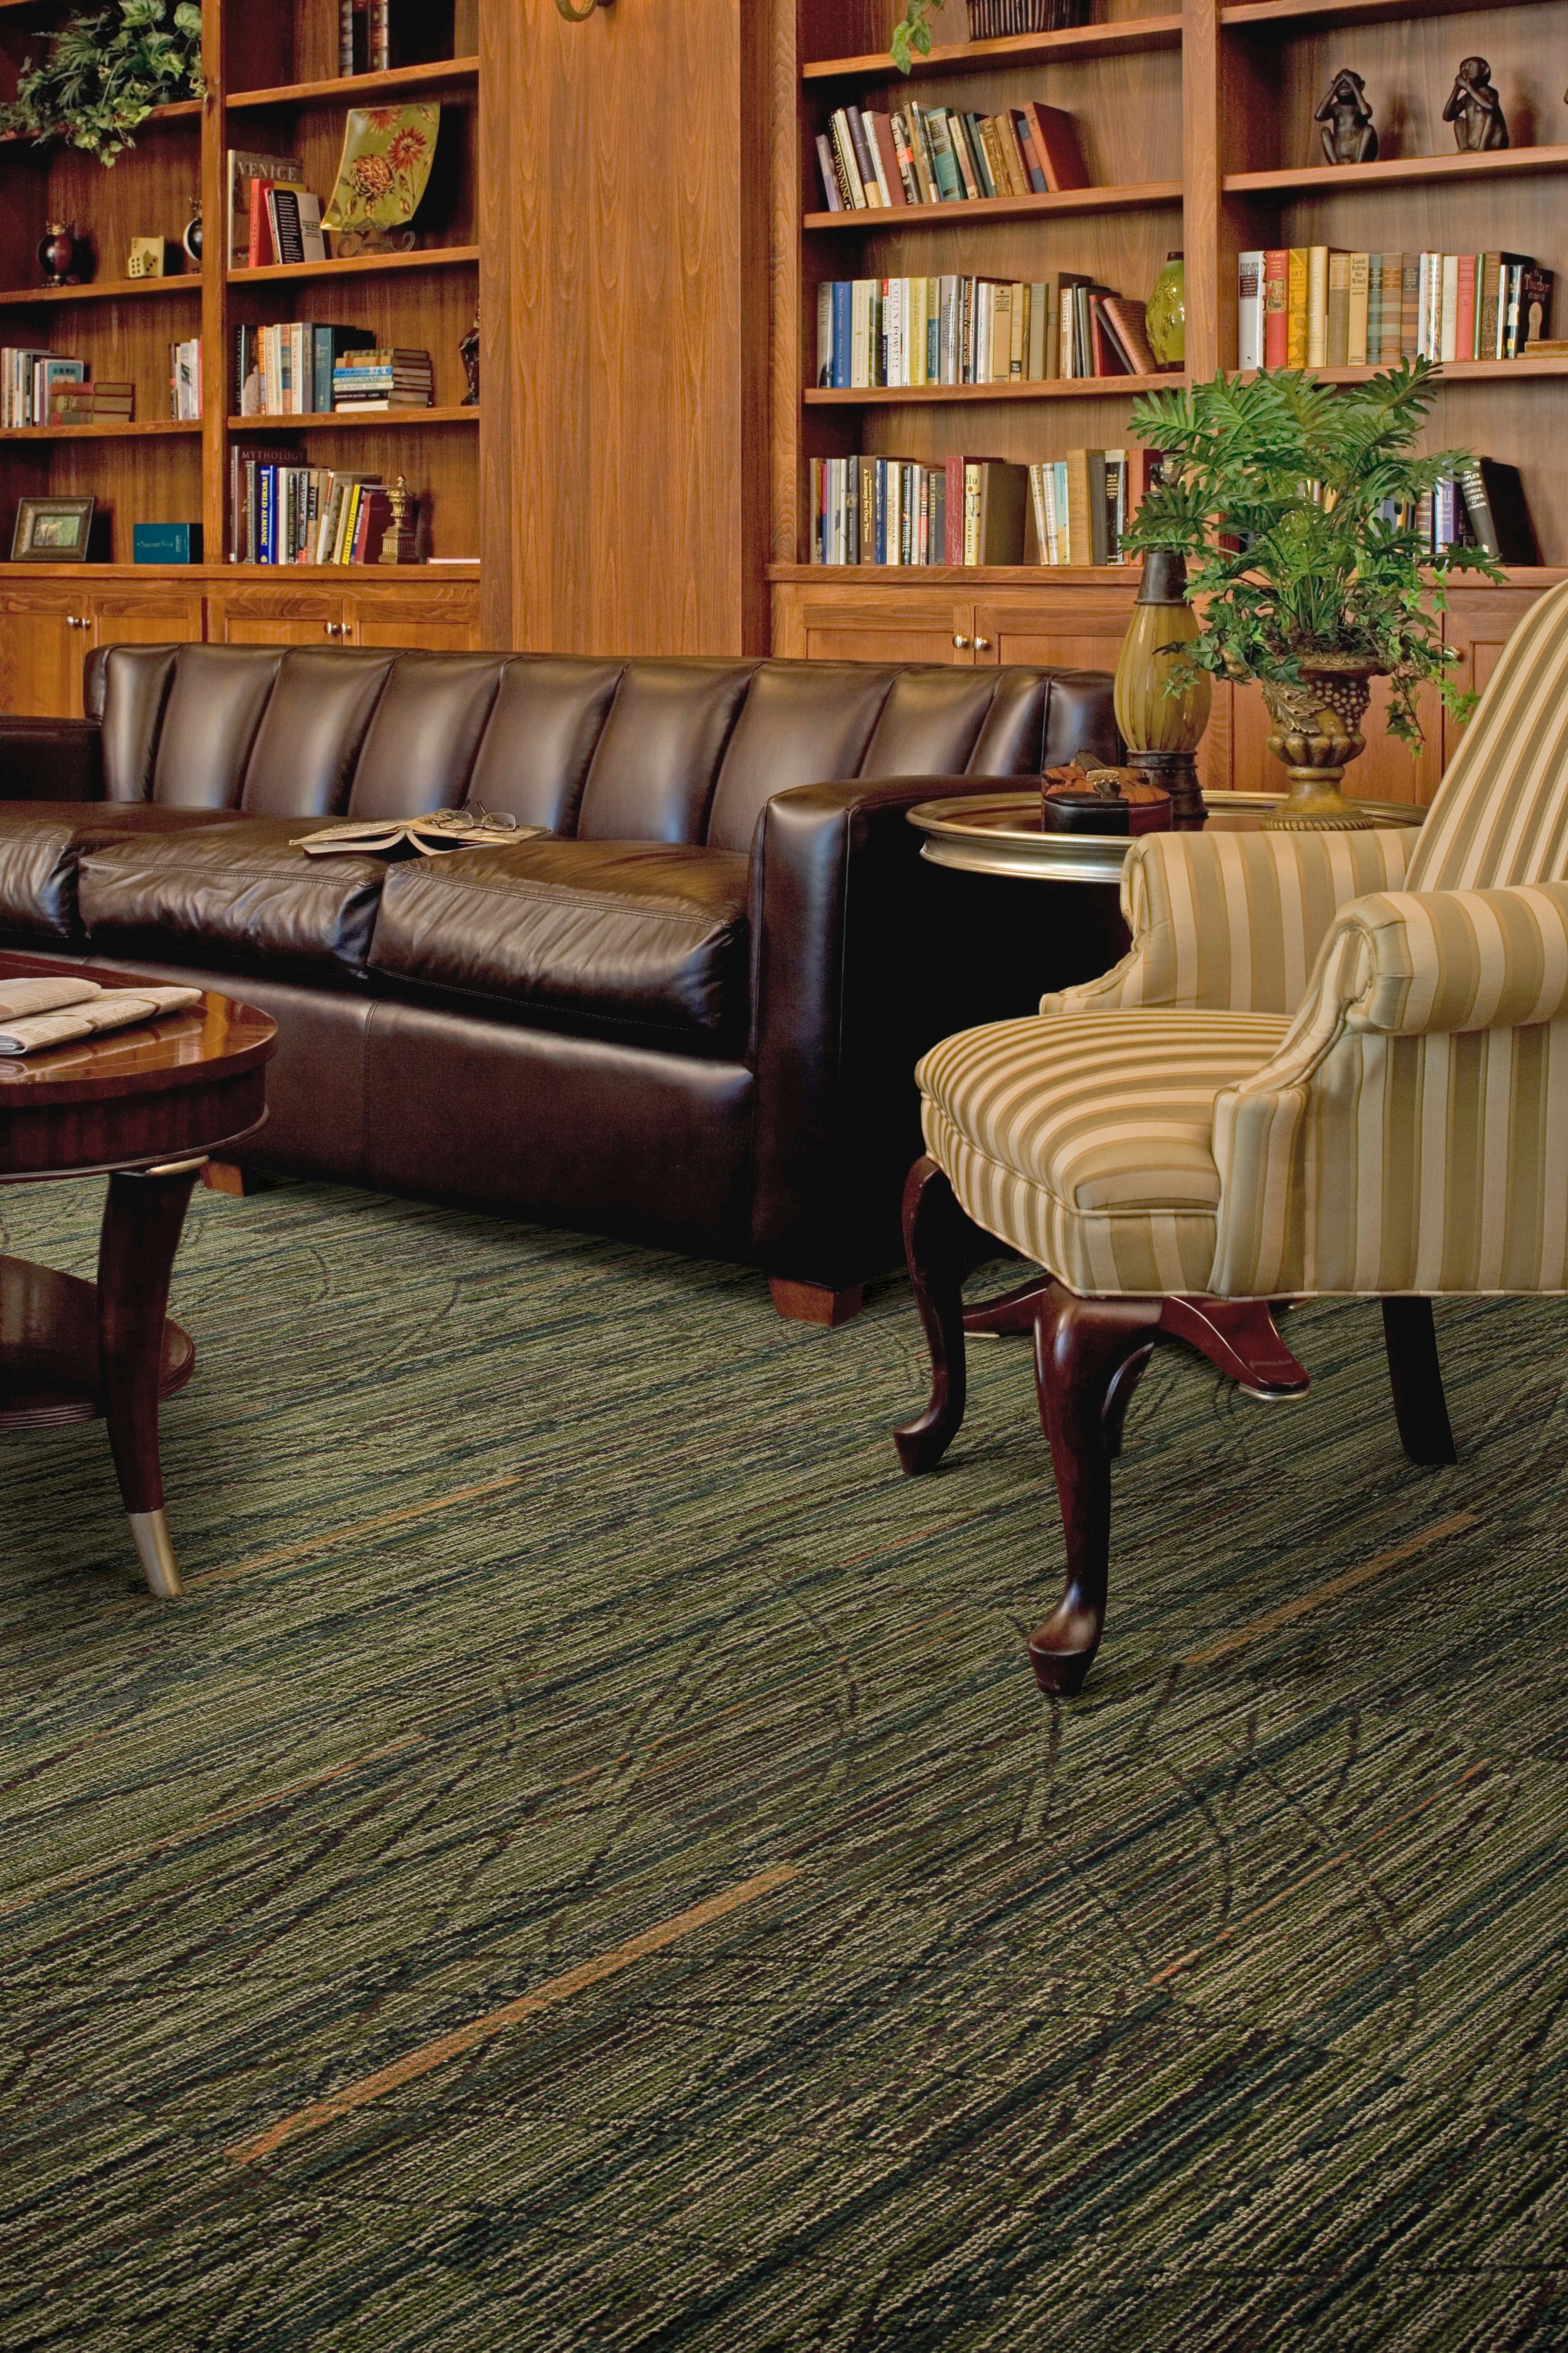 Interface Prairie Grass carpet tile in senior housing seating area with leather sofa and bookshelves image number 6